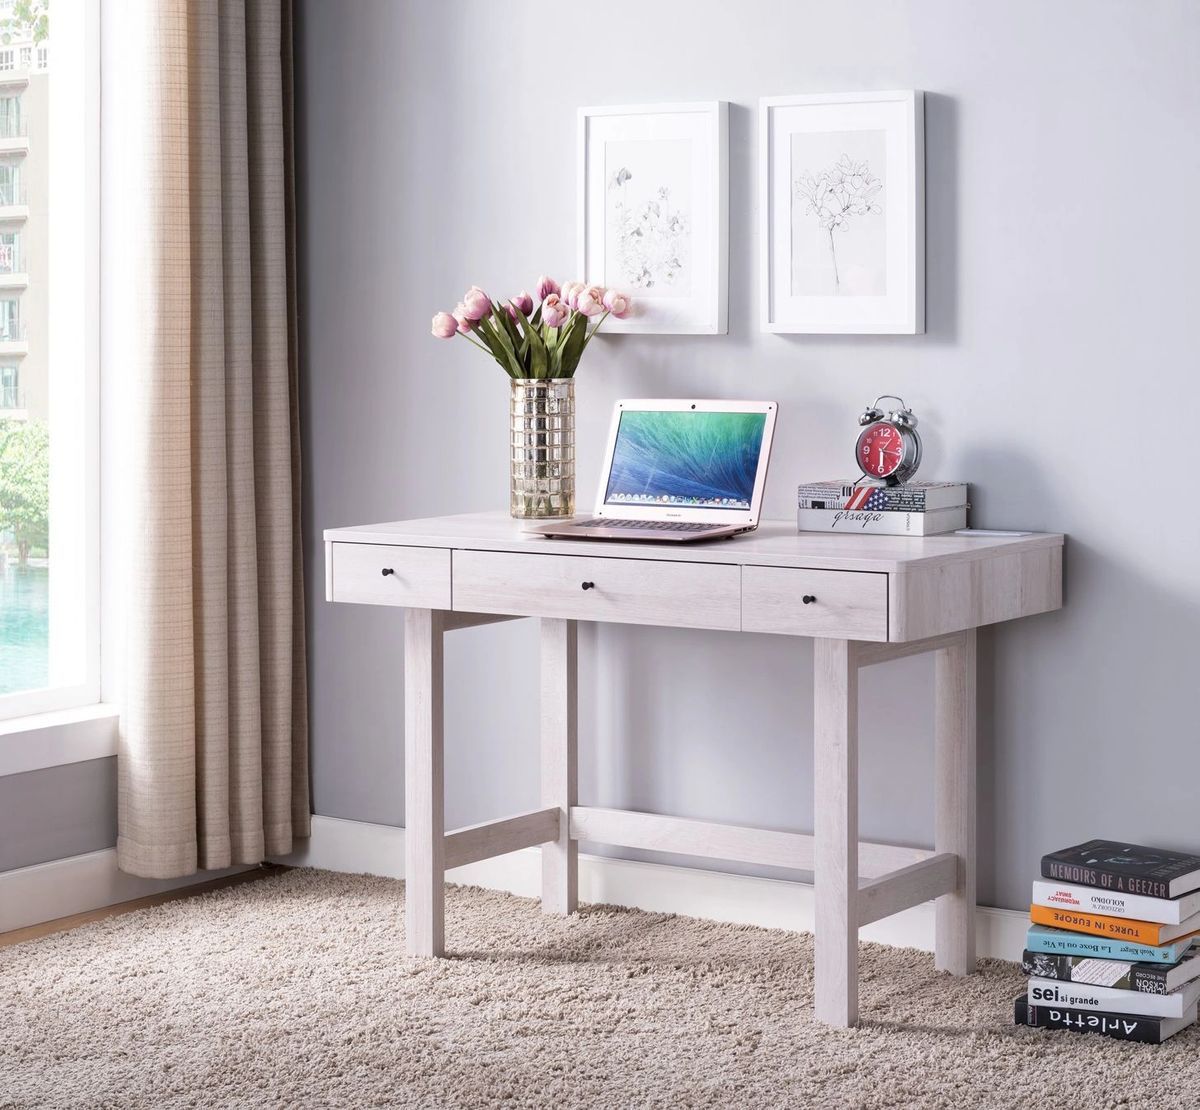 Fc Design Writing Desk With 3 Drawers, 1 Power Outlet, And 2 Usb Ports In White Oak Wood Writing Desks (View 5 of 15)